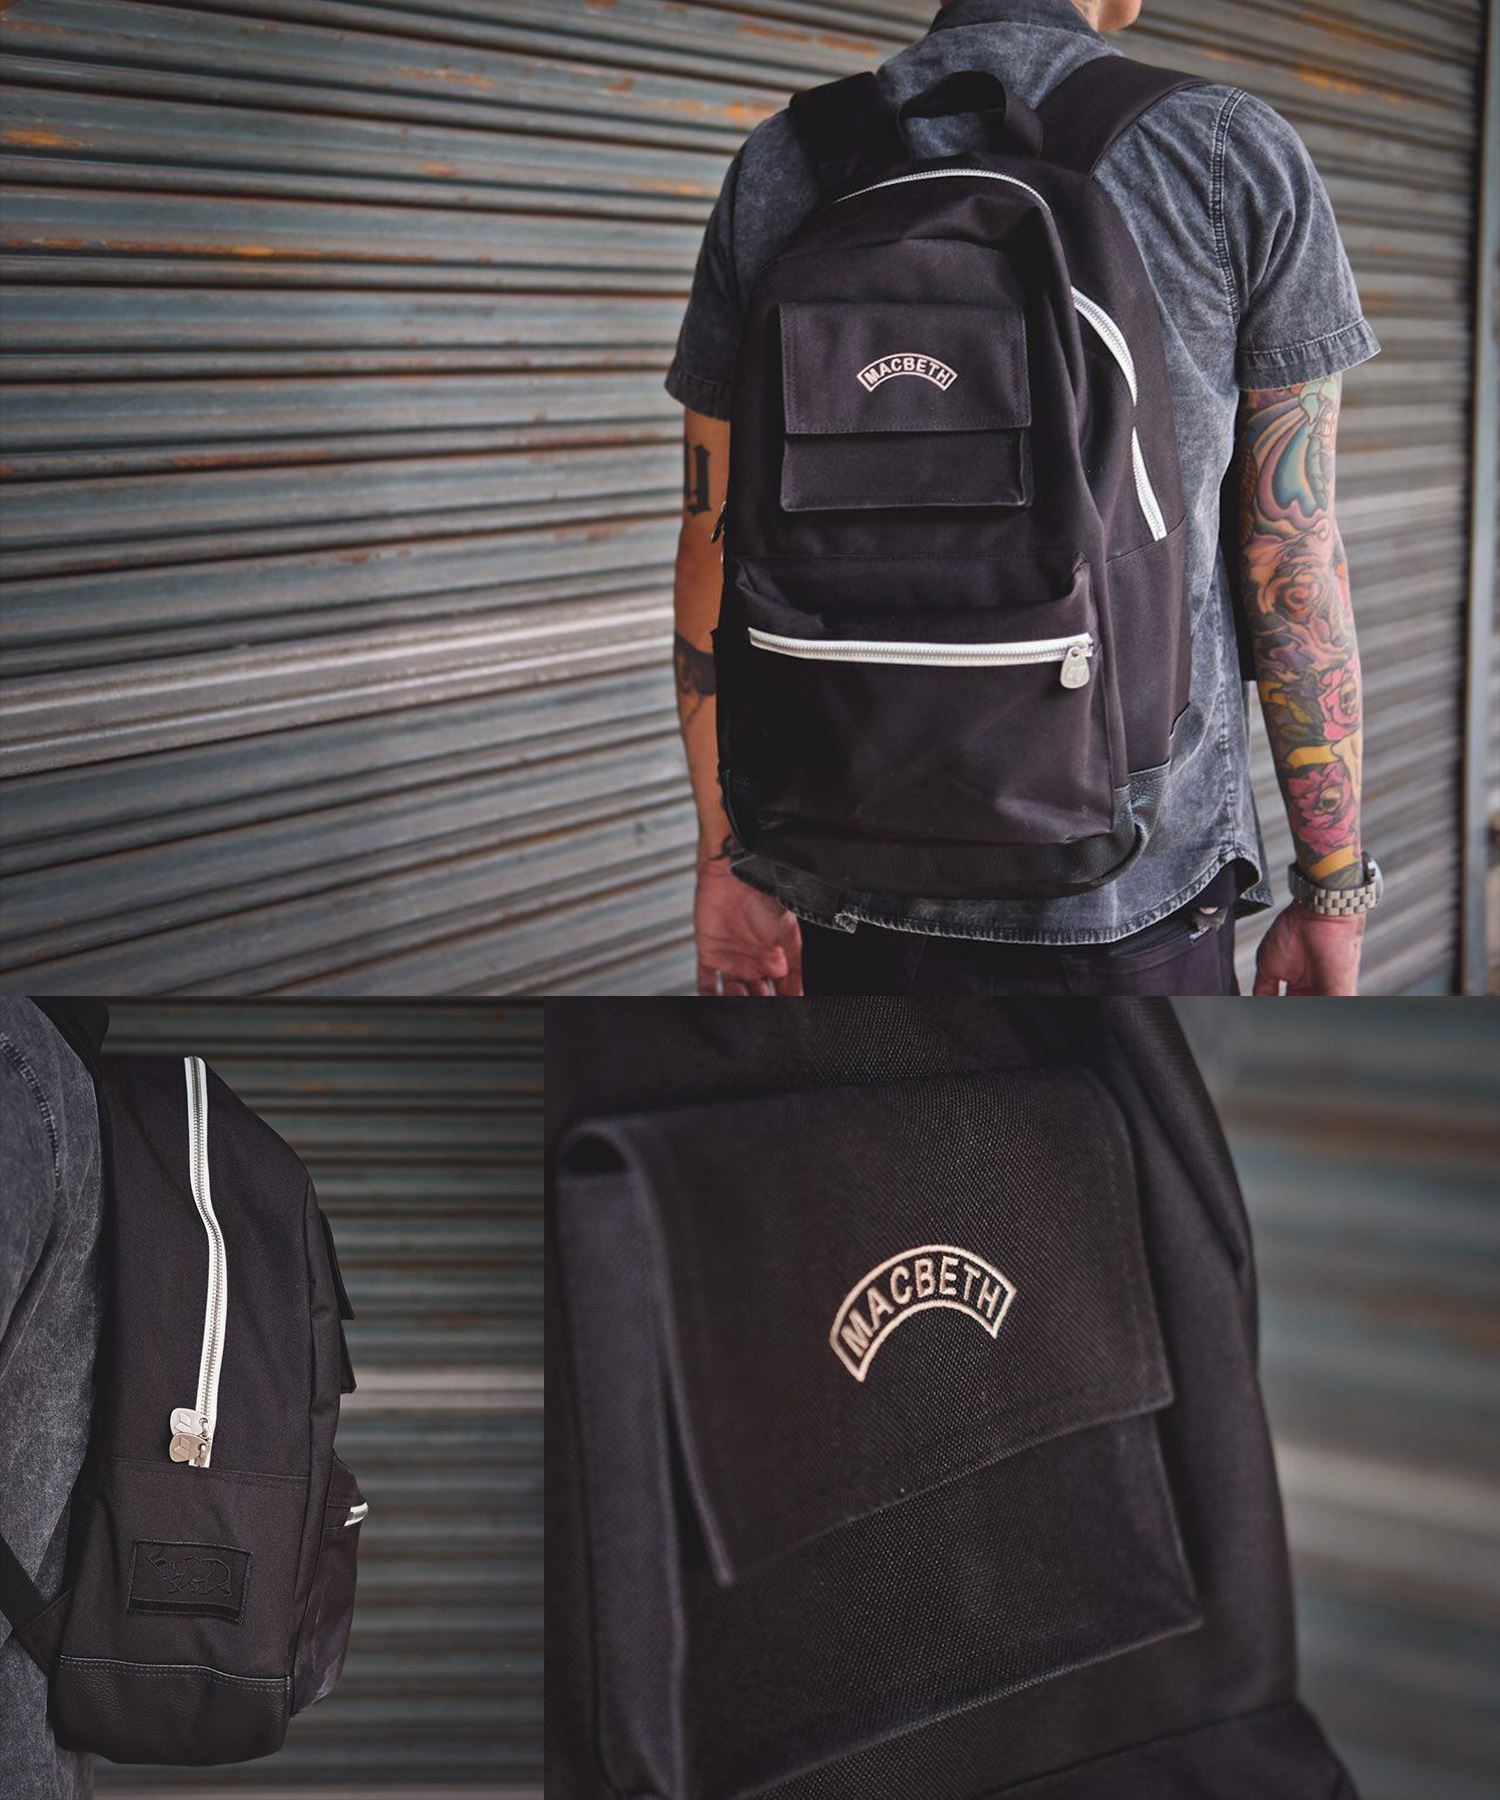 The Langley Backpack